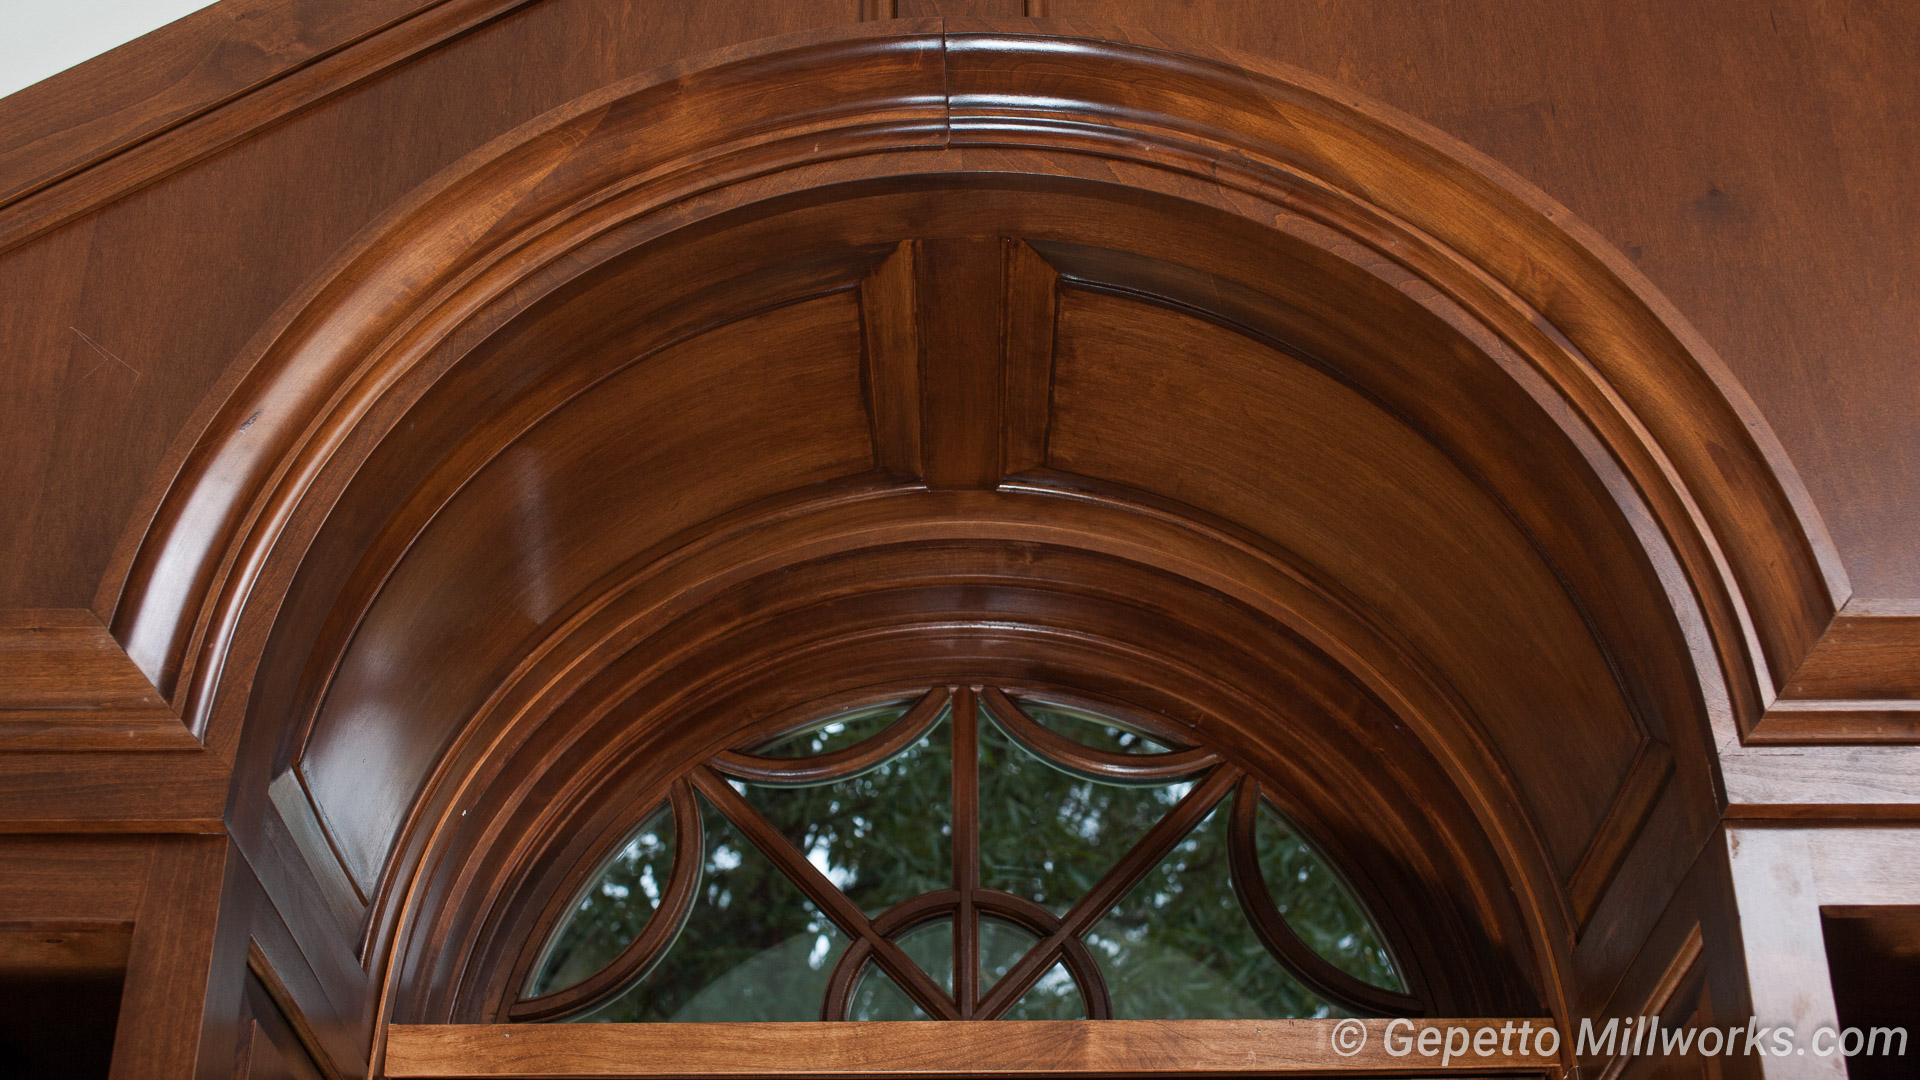 Arch & Round Top Radius Wooden Windows Custom Built to Order or Restored in Virginia by local craftsmen with historically accurate methods